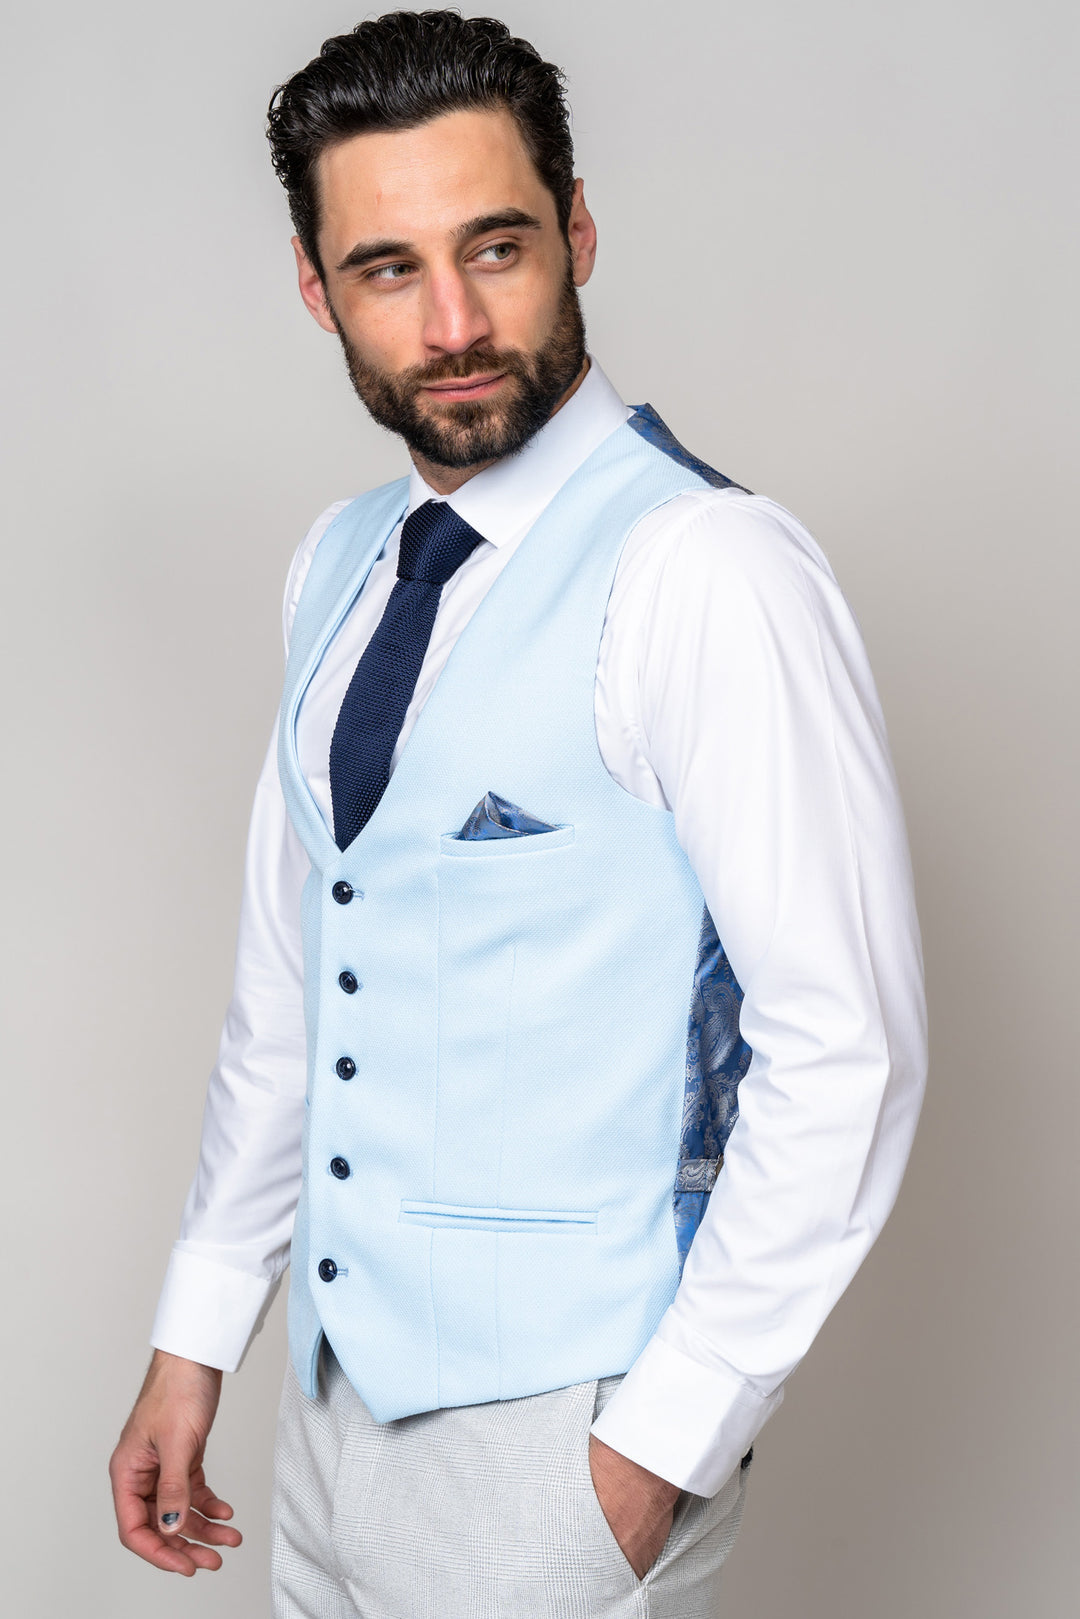 BROMLEY - Stone Check Suit with Kelvin Sky Waistcoat